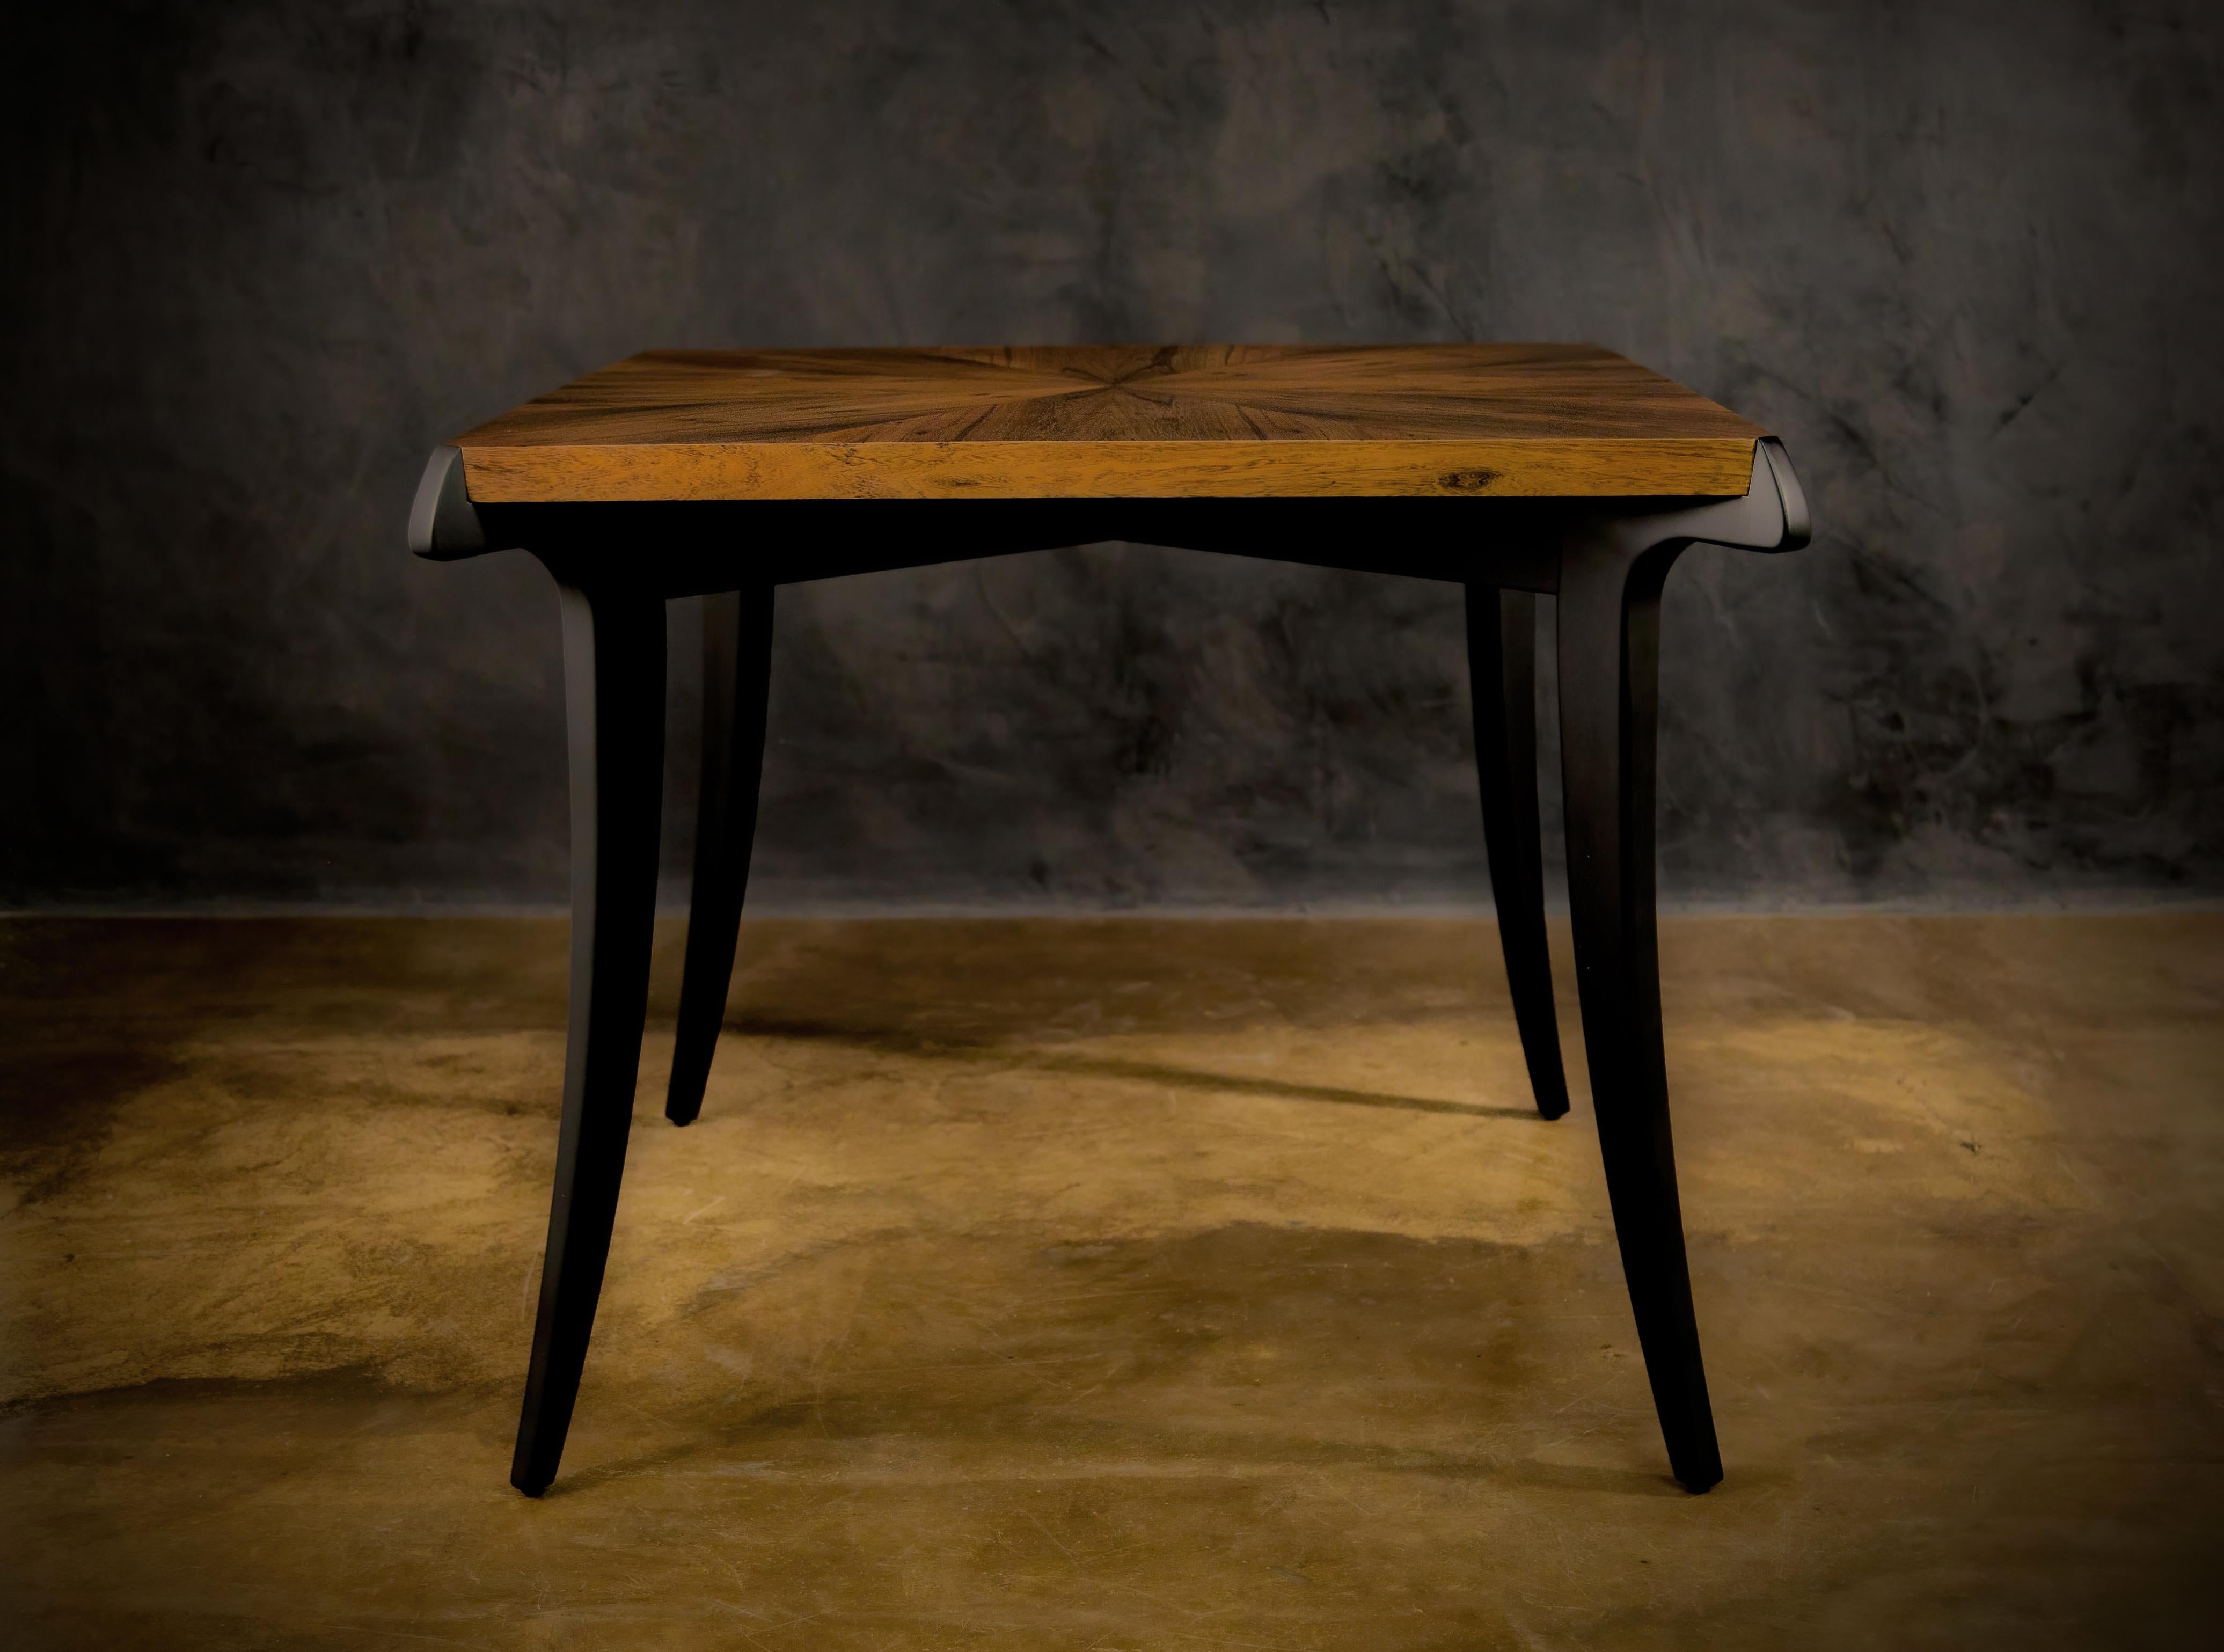 The Uccello writing table or Desk can also function as a game table, or, in larger sizes, as a dining table. Shown here in a naturally finished starburst Argentine Rosewood top with contrasting ebonized solid wood saber legs, evocative of the form